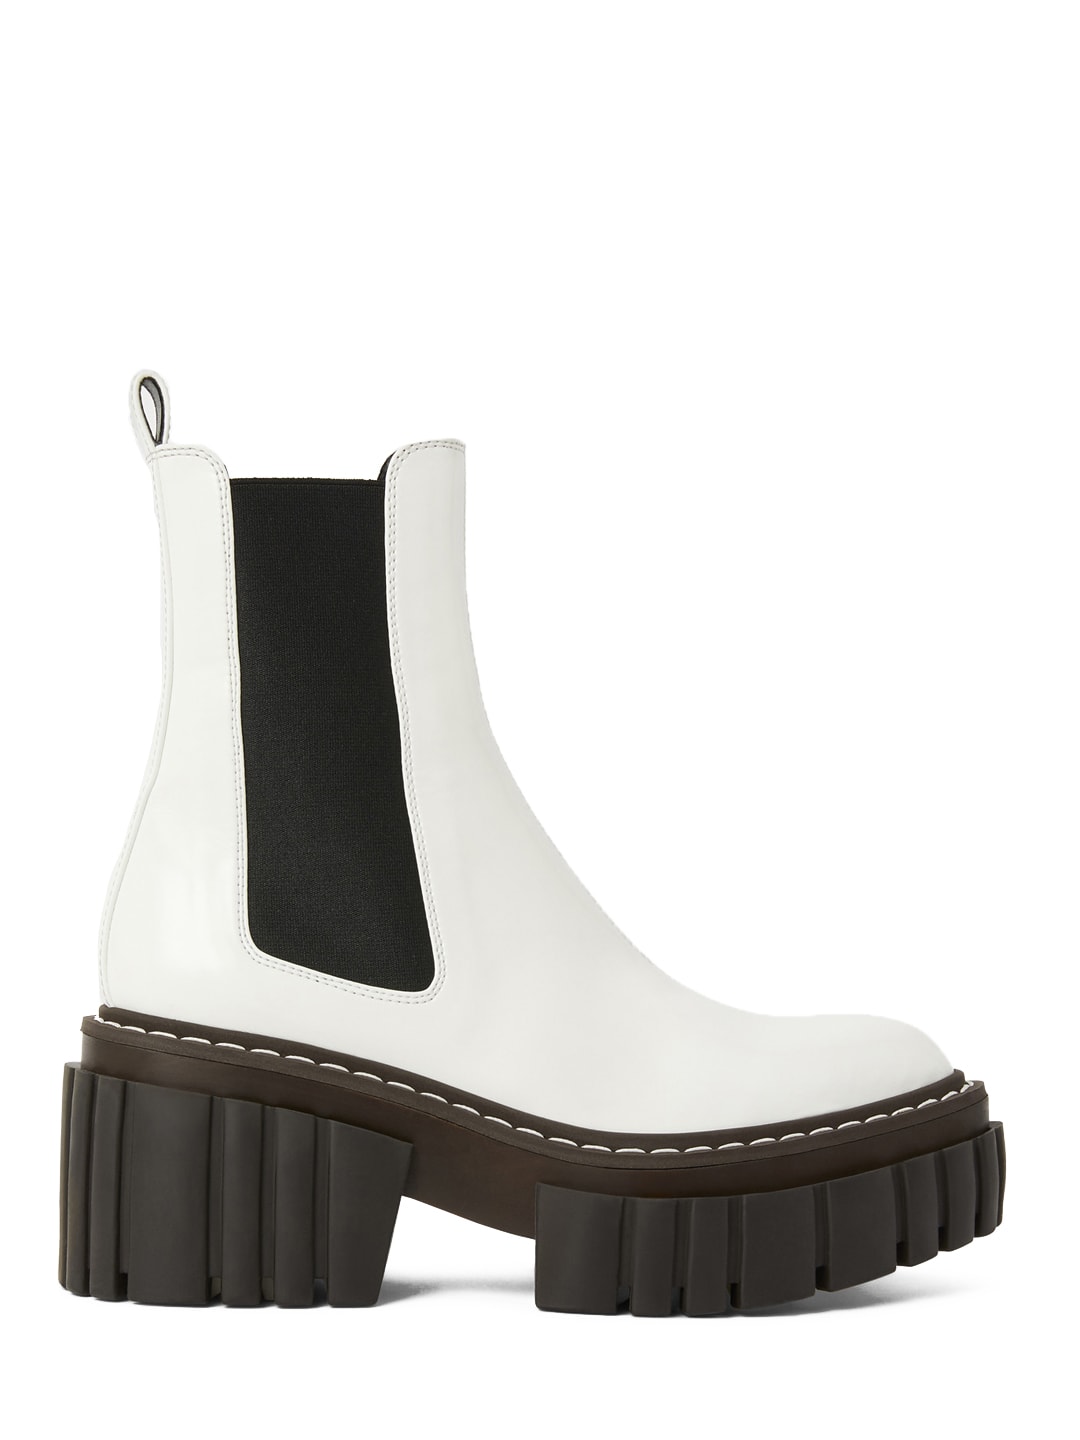 Buy Stella McCartney Emilie Chelsea Boot online, shop Stella McCartney shoes with free shipping